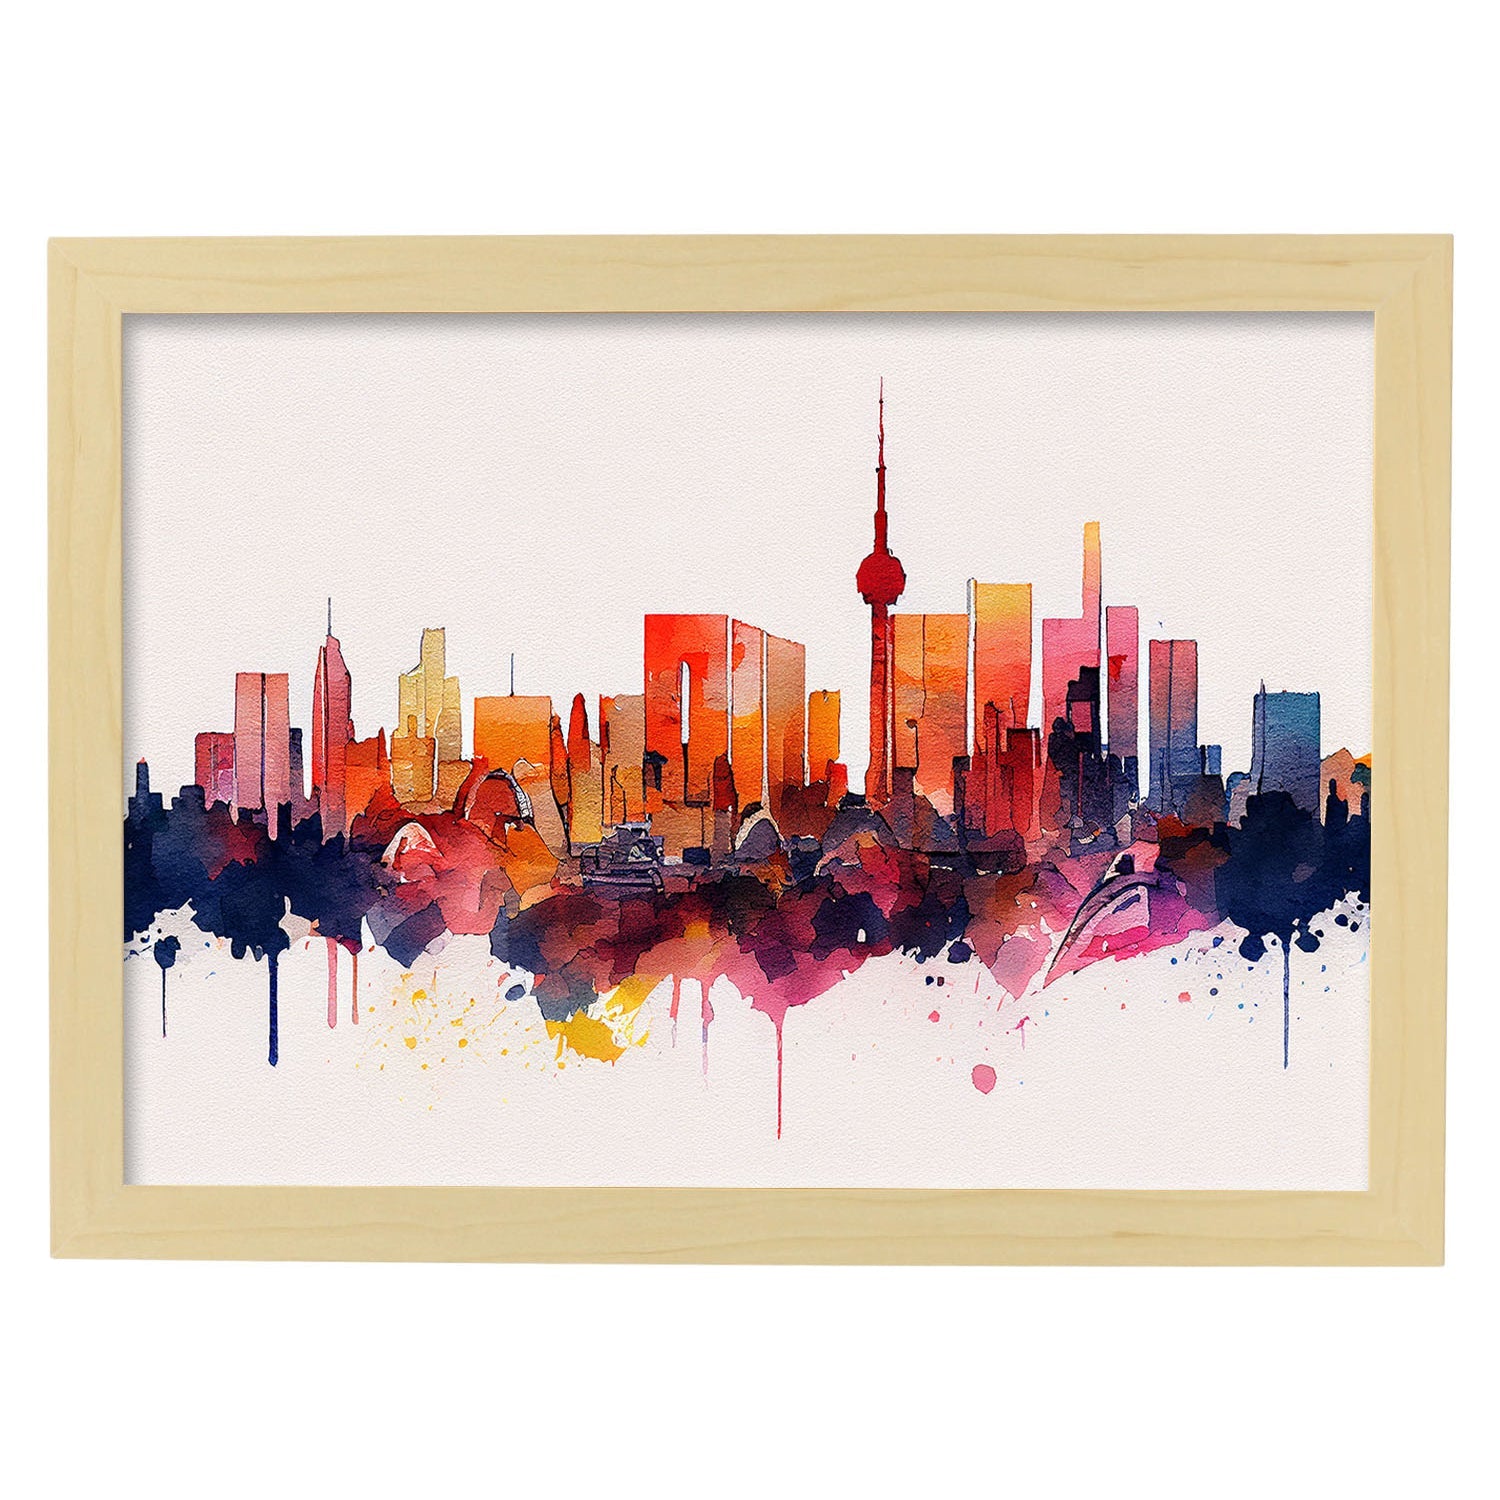 Nacnic watercolor of a skyline of the city of Tokyo_2. Aesthetic Wall Art Prints for Bedroom or Living Room Design.-Artwork-Nacnic-A4-Marco Madera Clara-Nacnic Estudio SL